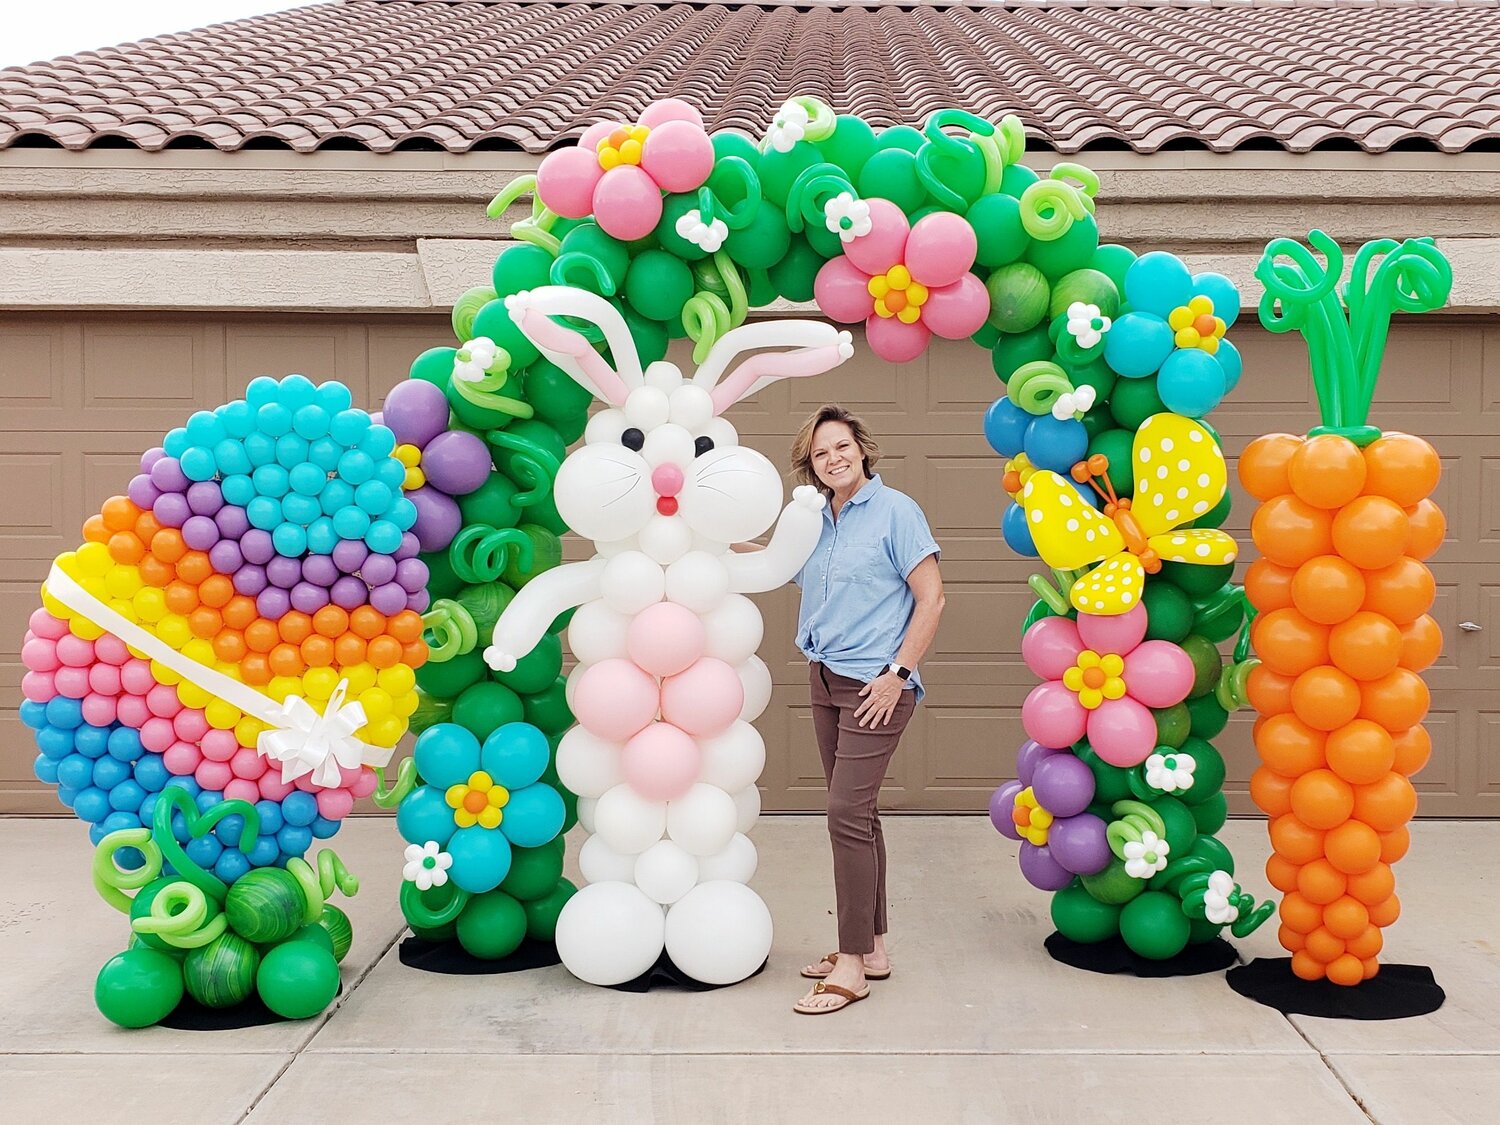 Brenda Hatch is donating her time and talents as a balloon artist. She started Balloon Happy AZ in Mesa in 2012.